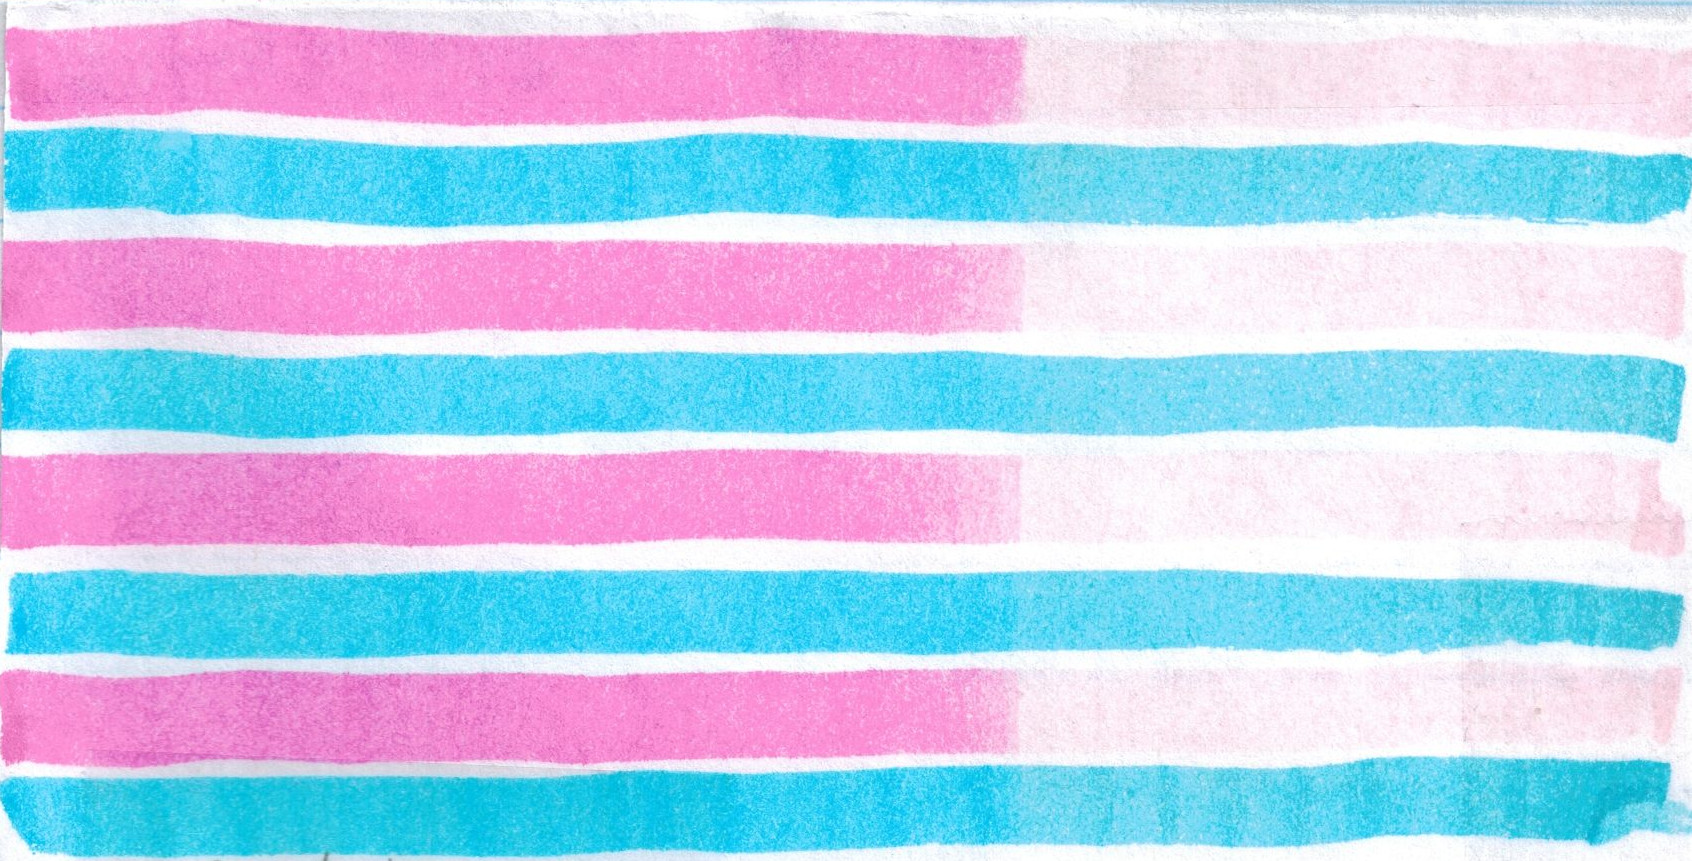 Pink and blue Sharpie highlighter on paper after exposing the right side with sunshine in Longmont, Colorado on August 9, 2020 for 2 hours, 33 minutes